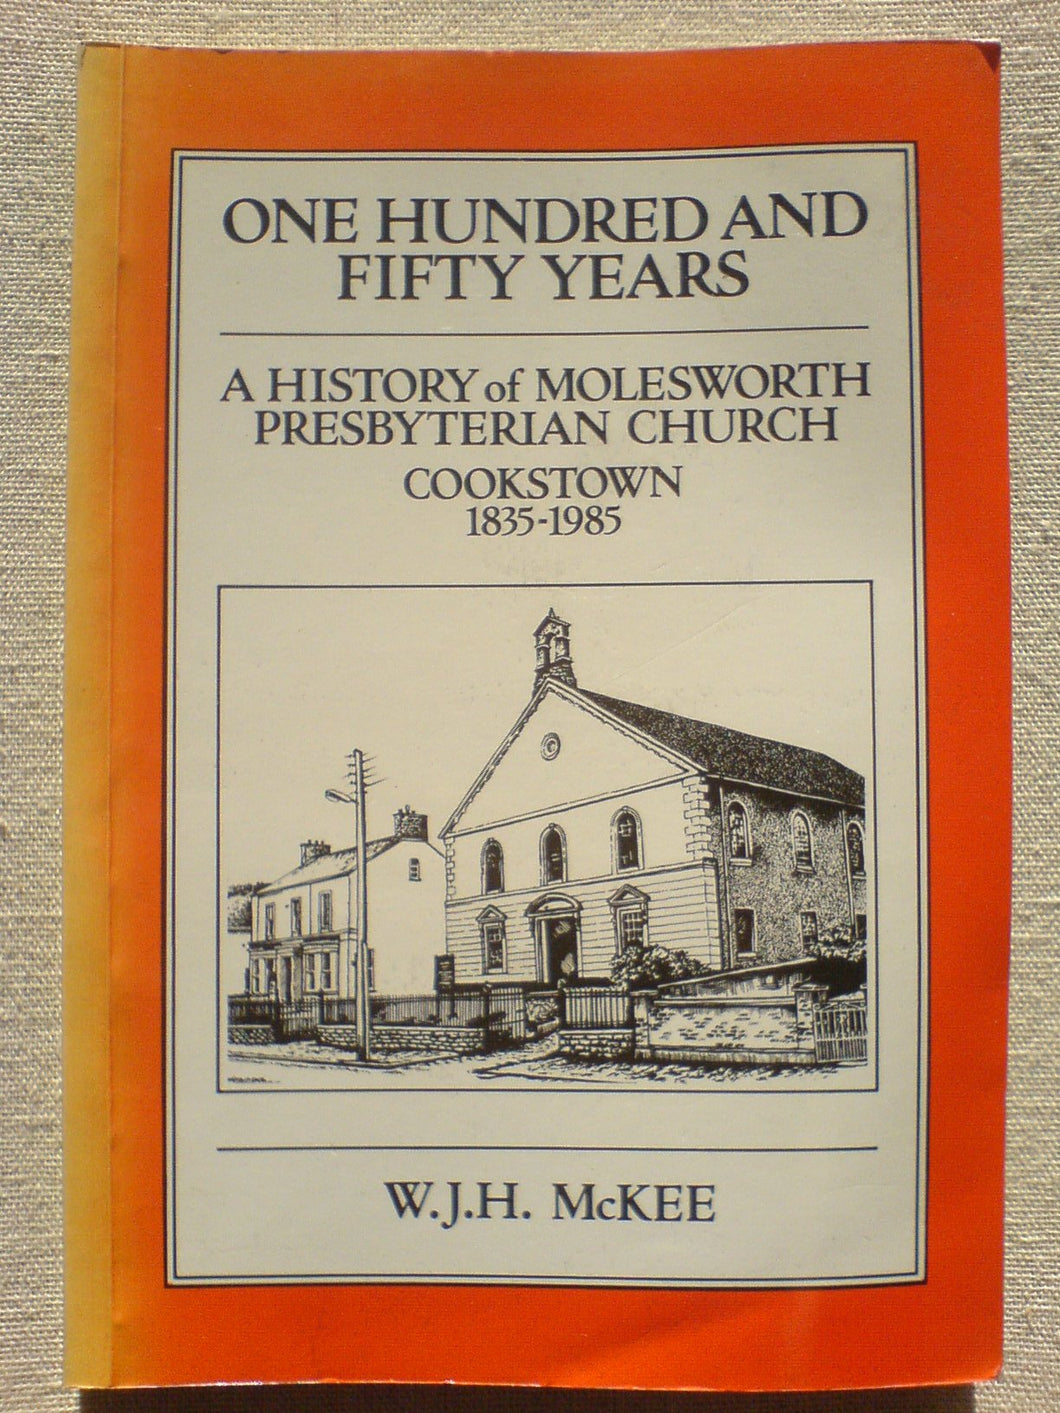 One hundred and fifty years: A history of Molesworth Presbyterian Church, Cookstown, 1835-1985